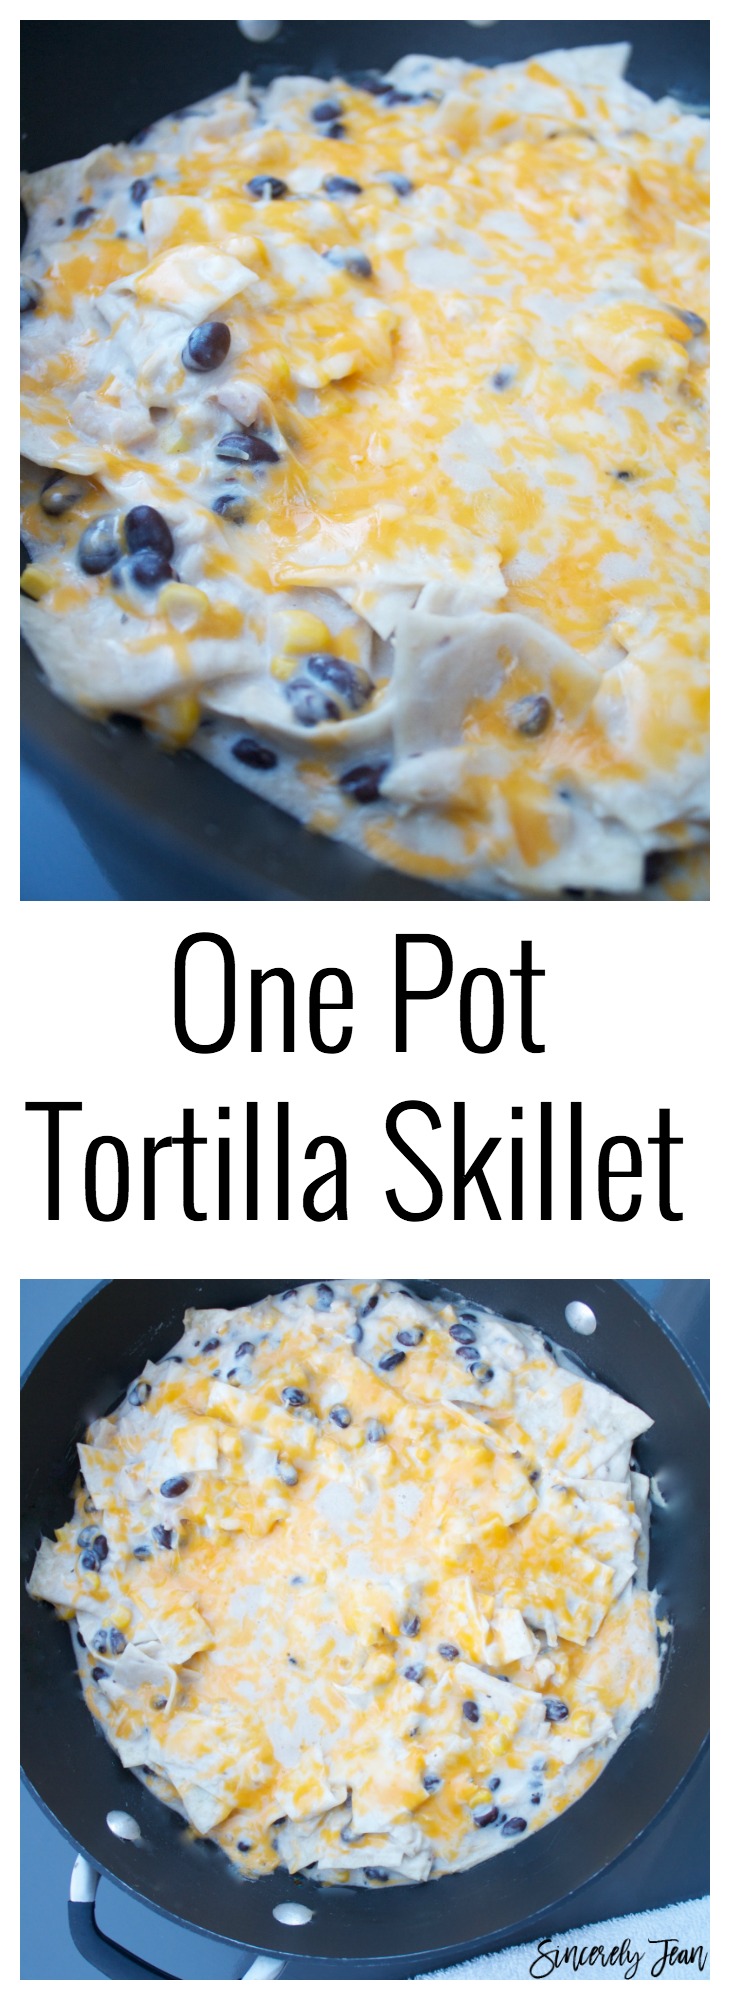 One pan tortilla skillet: easy, simple, one pot, mexican dish